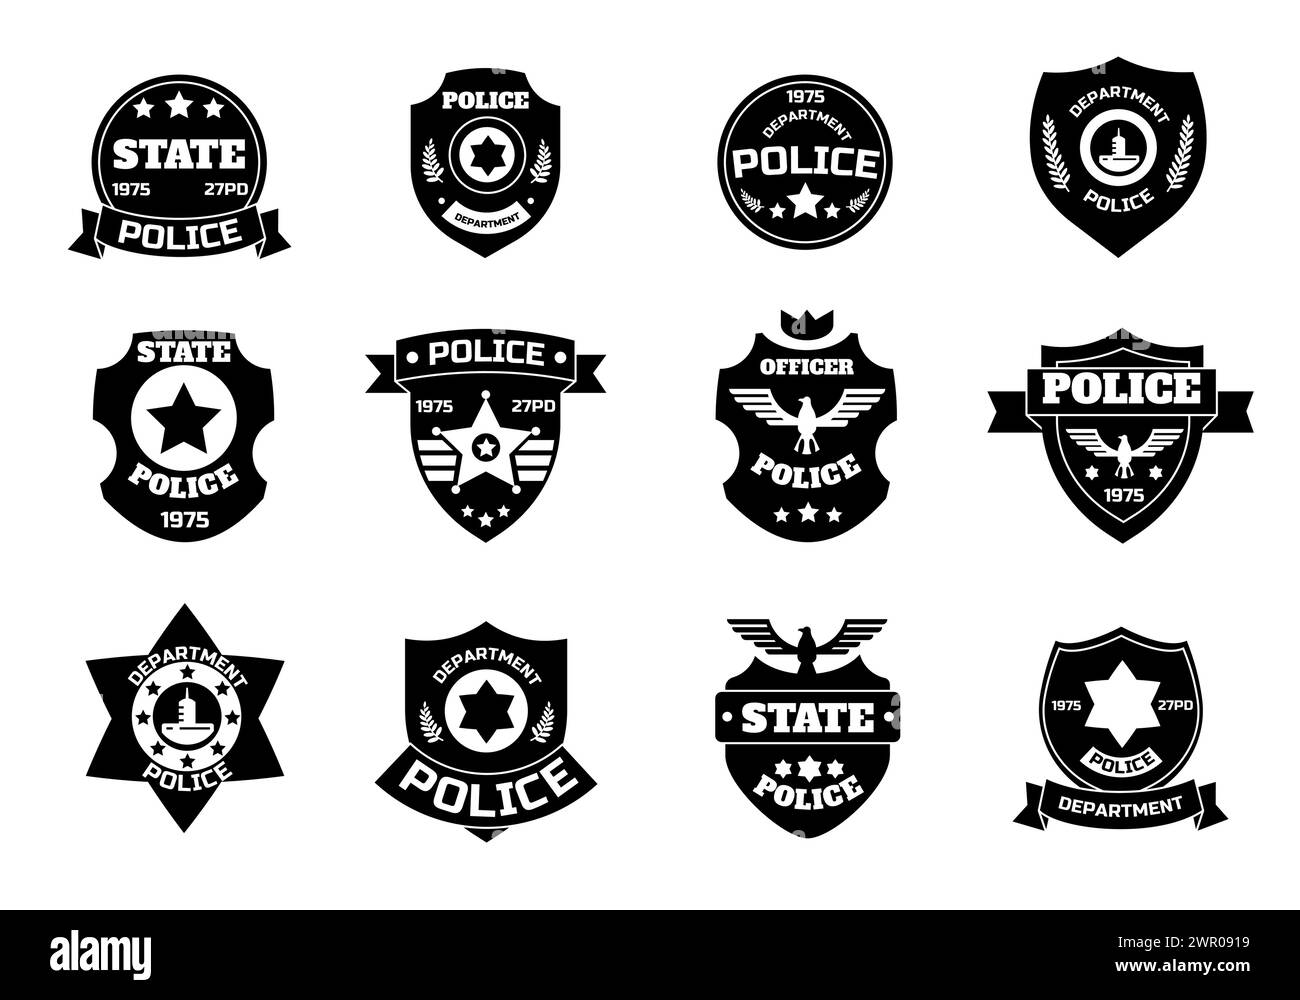 Police black symbol. Cop badge with shield and sheriff star, law enforcement officer patch insignia. Vector federal police department emblem Stock Vector